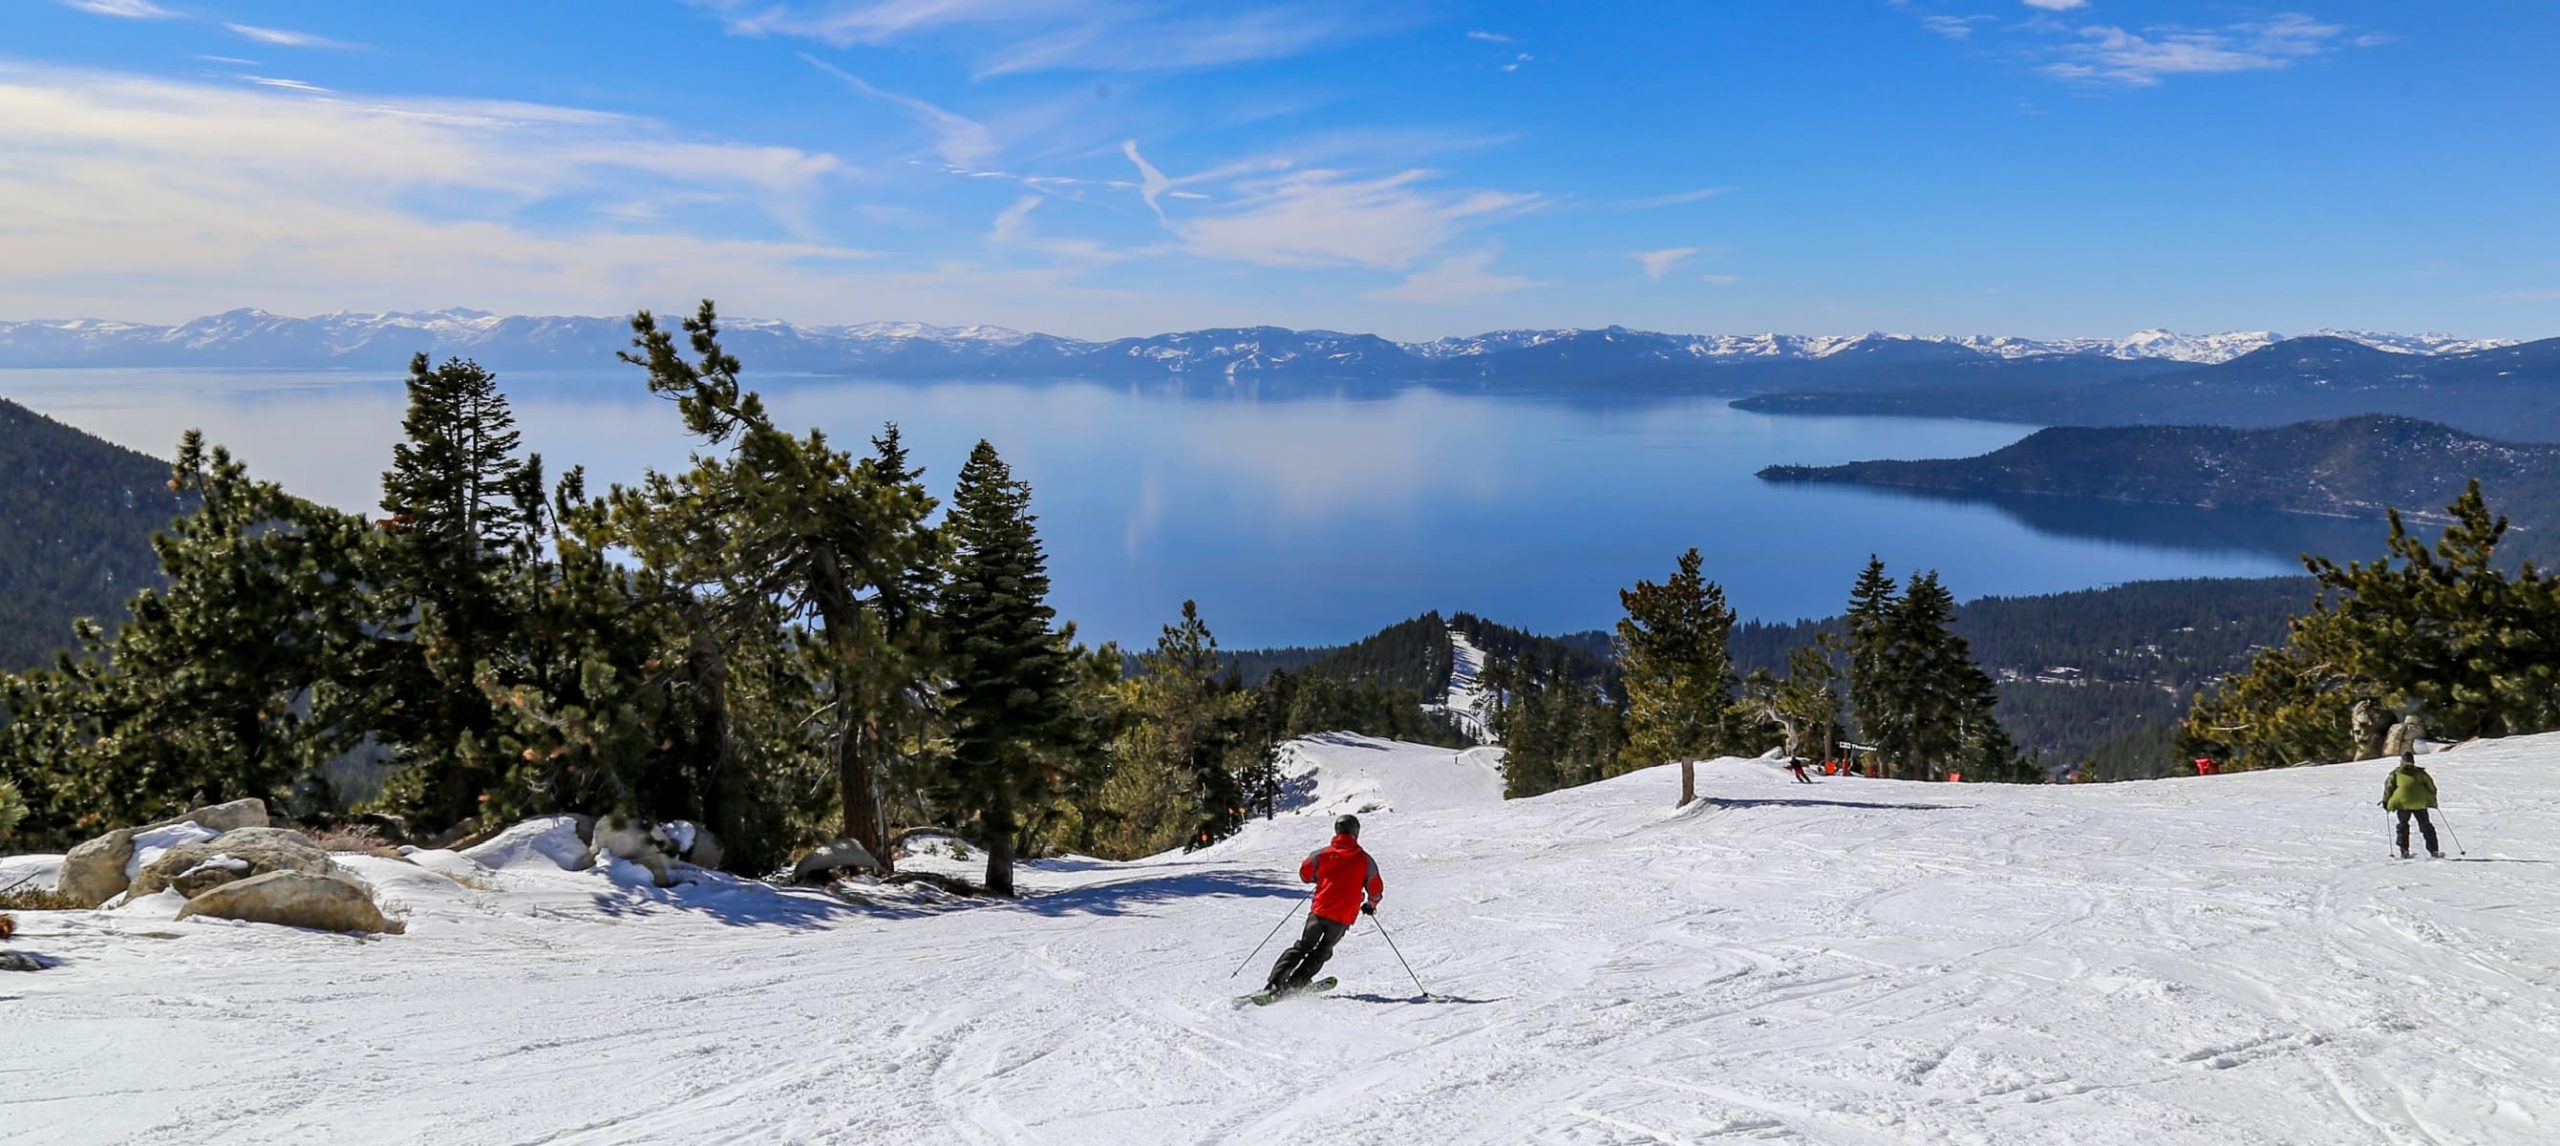 The Best Winter Vacations In The US